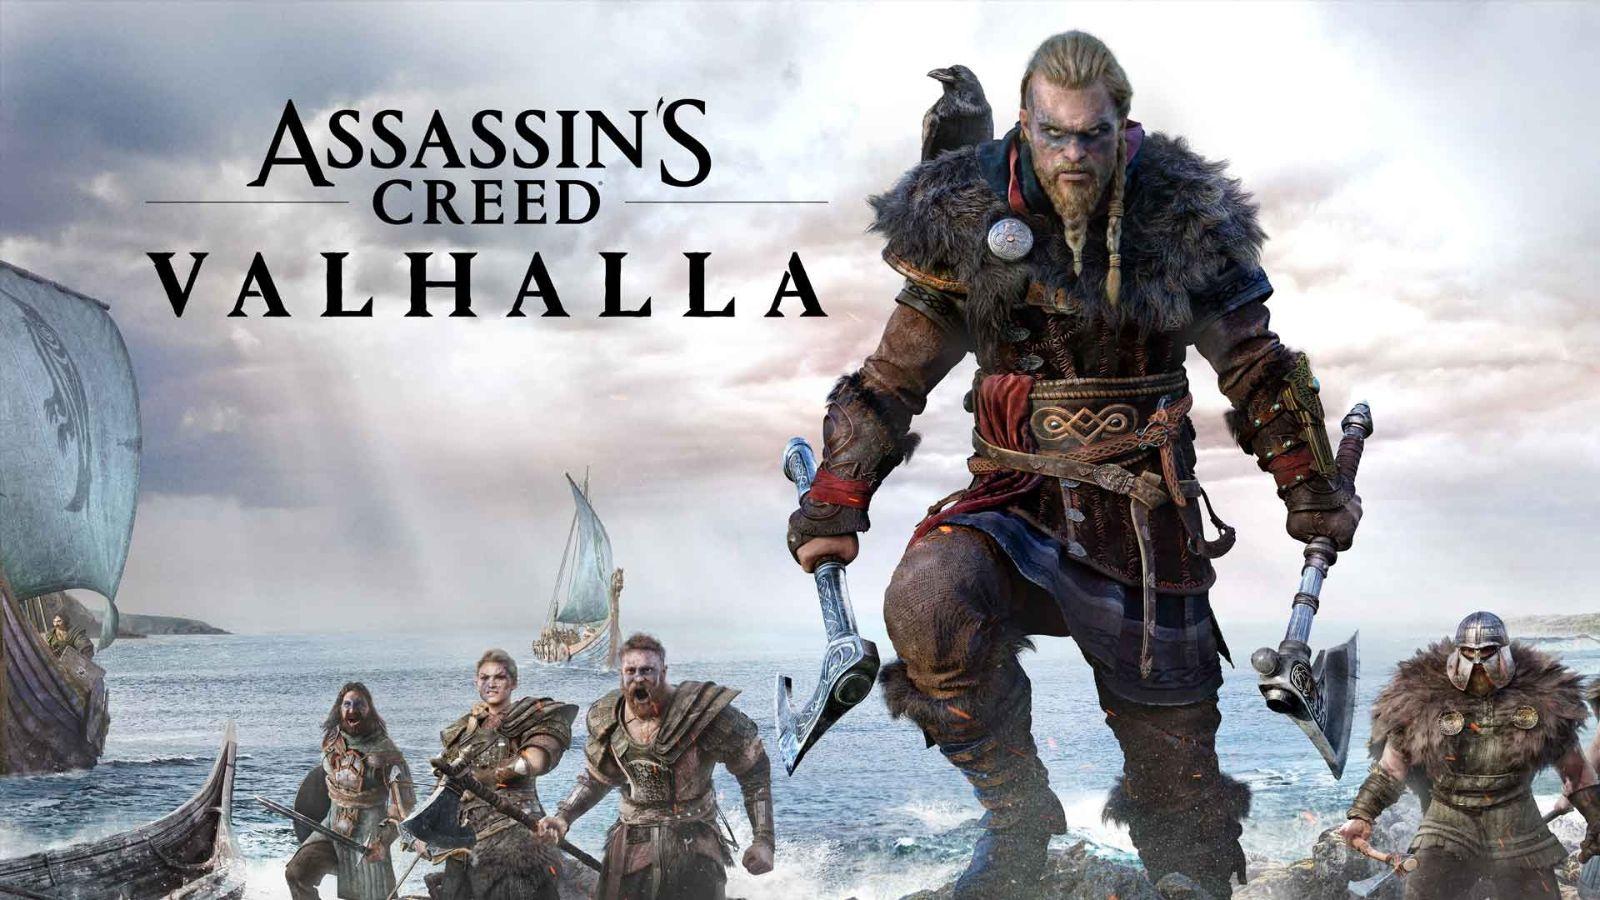 Assassin's Creed Valhalla is Going to Viking-Smash Your Hard Drive